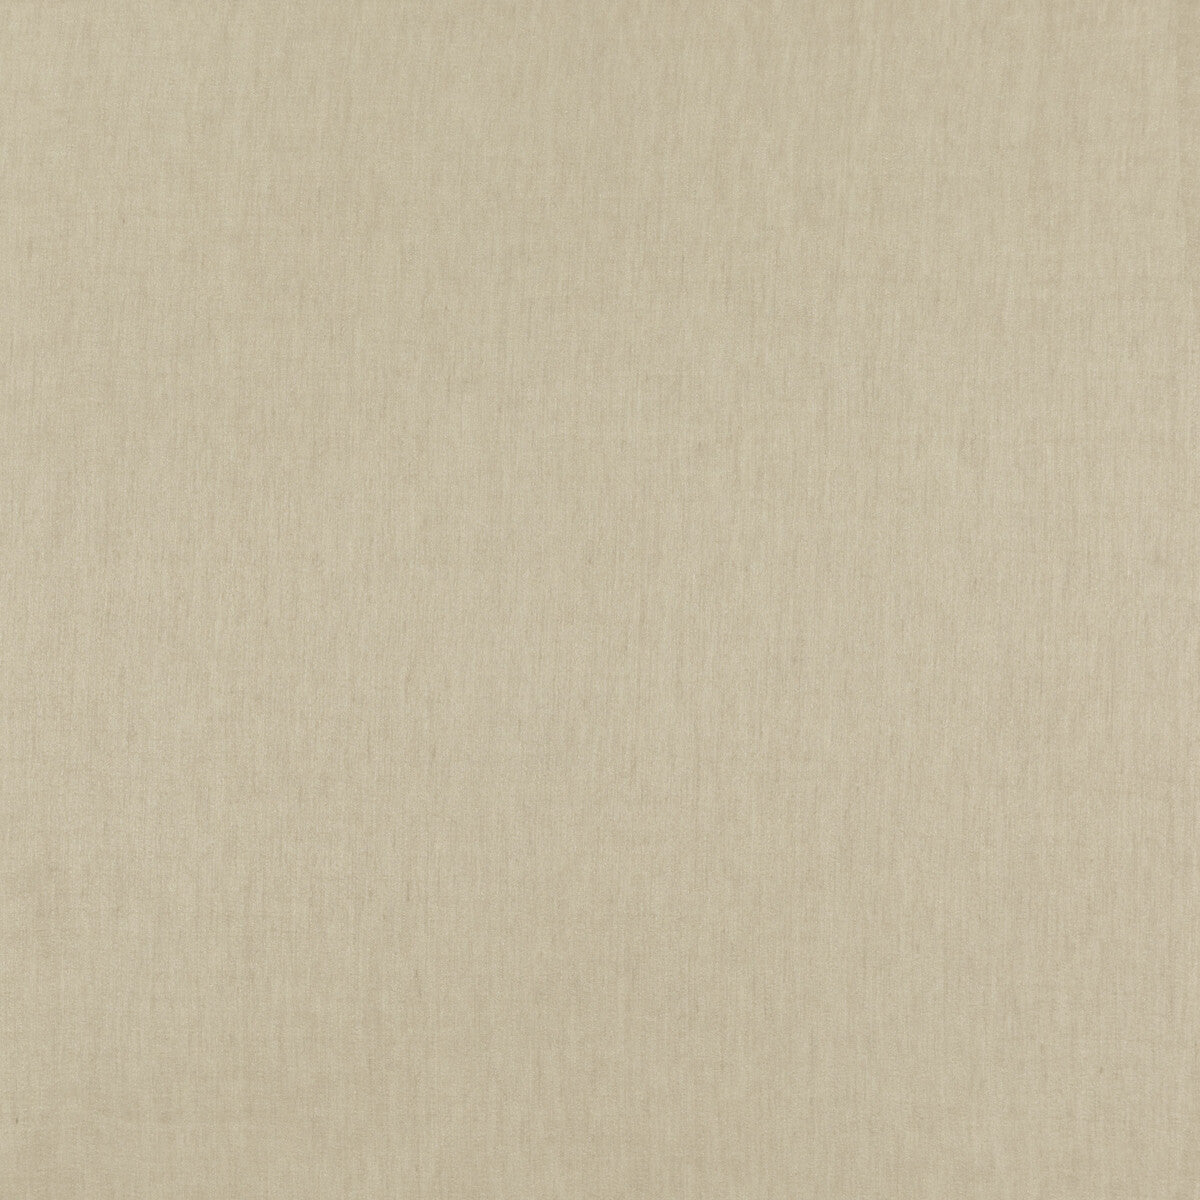 Southerly Breeze fabric in flax color - pattern ED95009.110.0 - by Threads in the Meridian collection